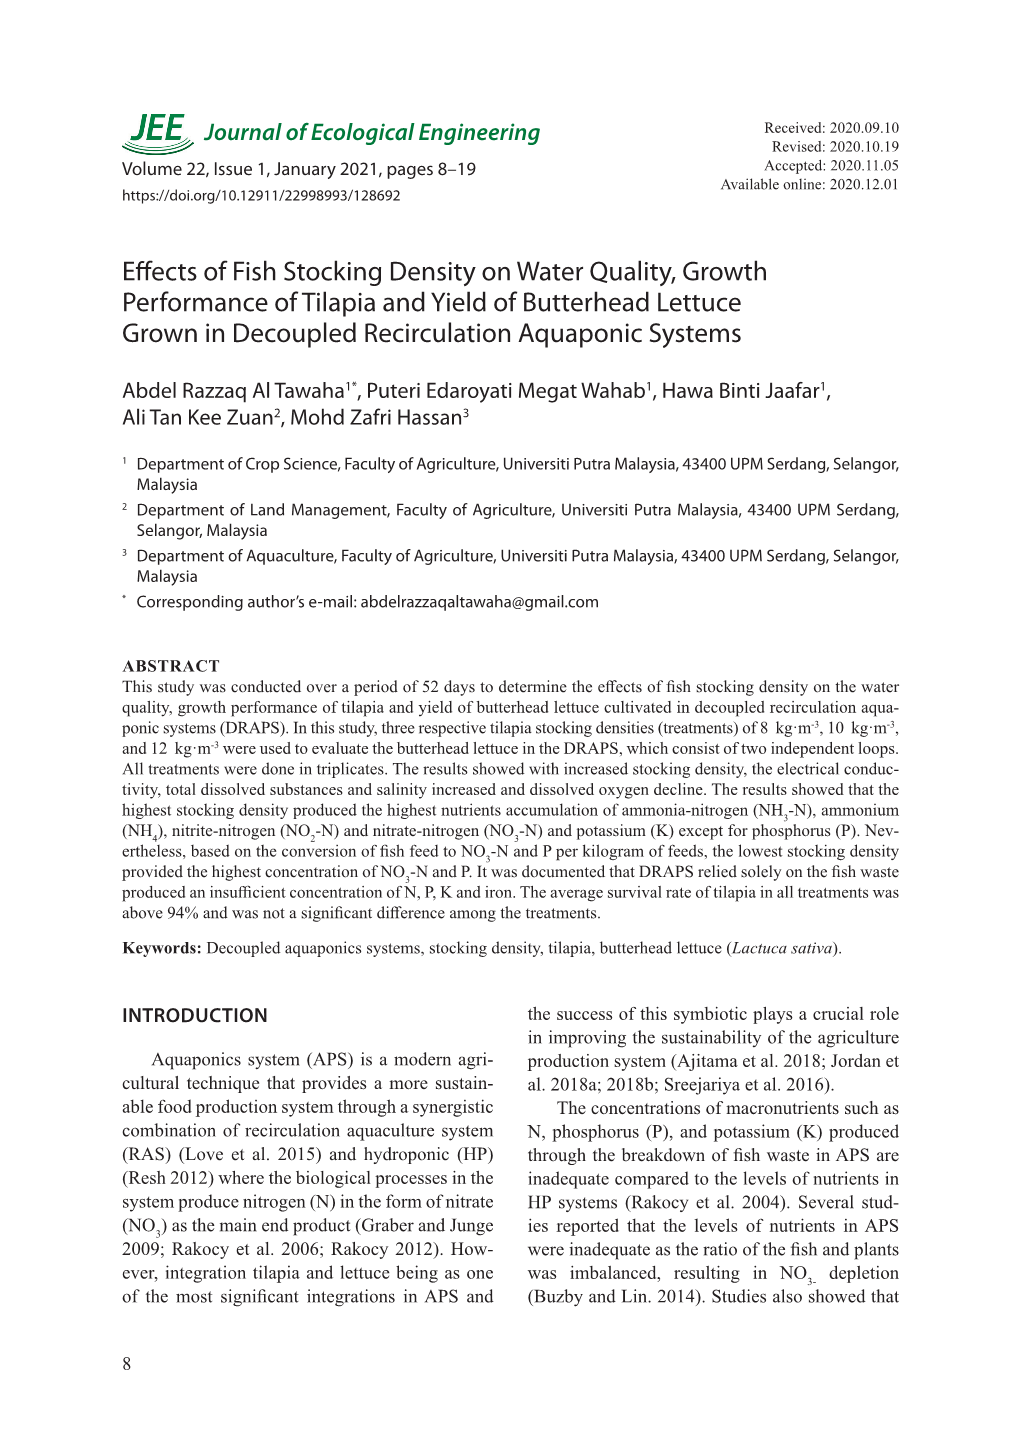 Effects of Fish Stocking Density on Water Quality, Growth Performance of Tilapia and Yield of Butterhead Lettuce Grown in Decoupled Recirculation Aquaponic Systems